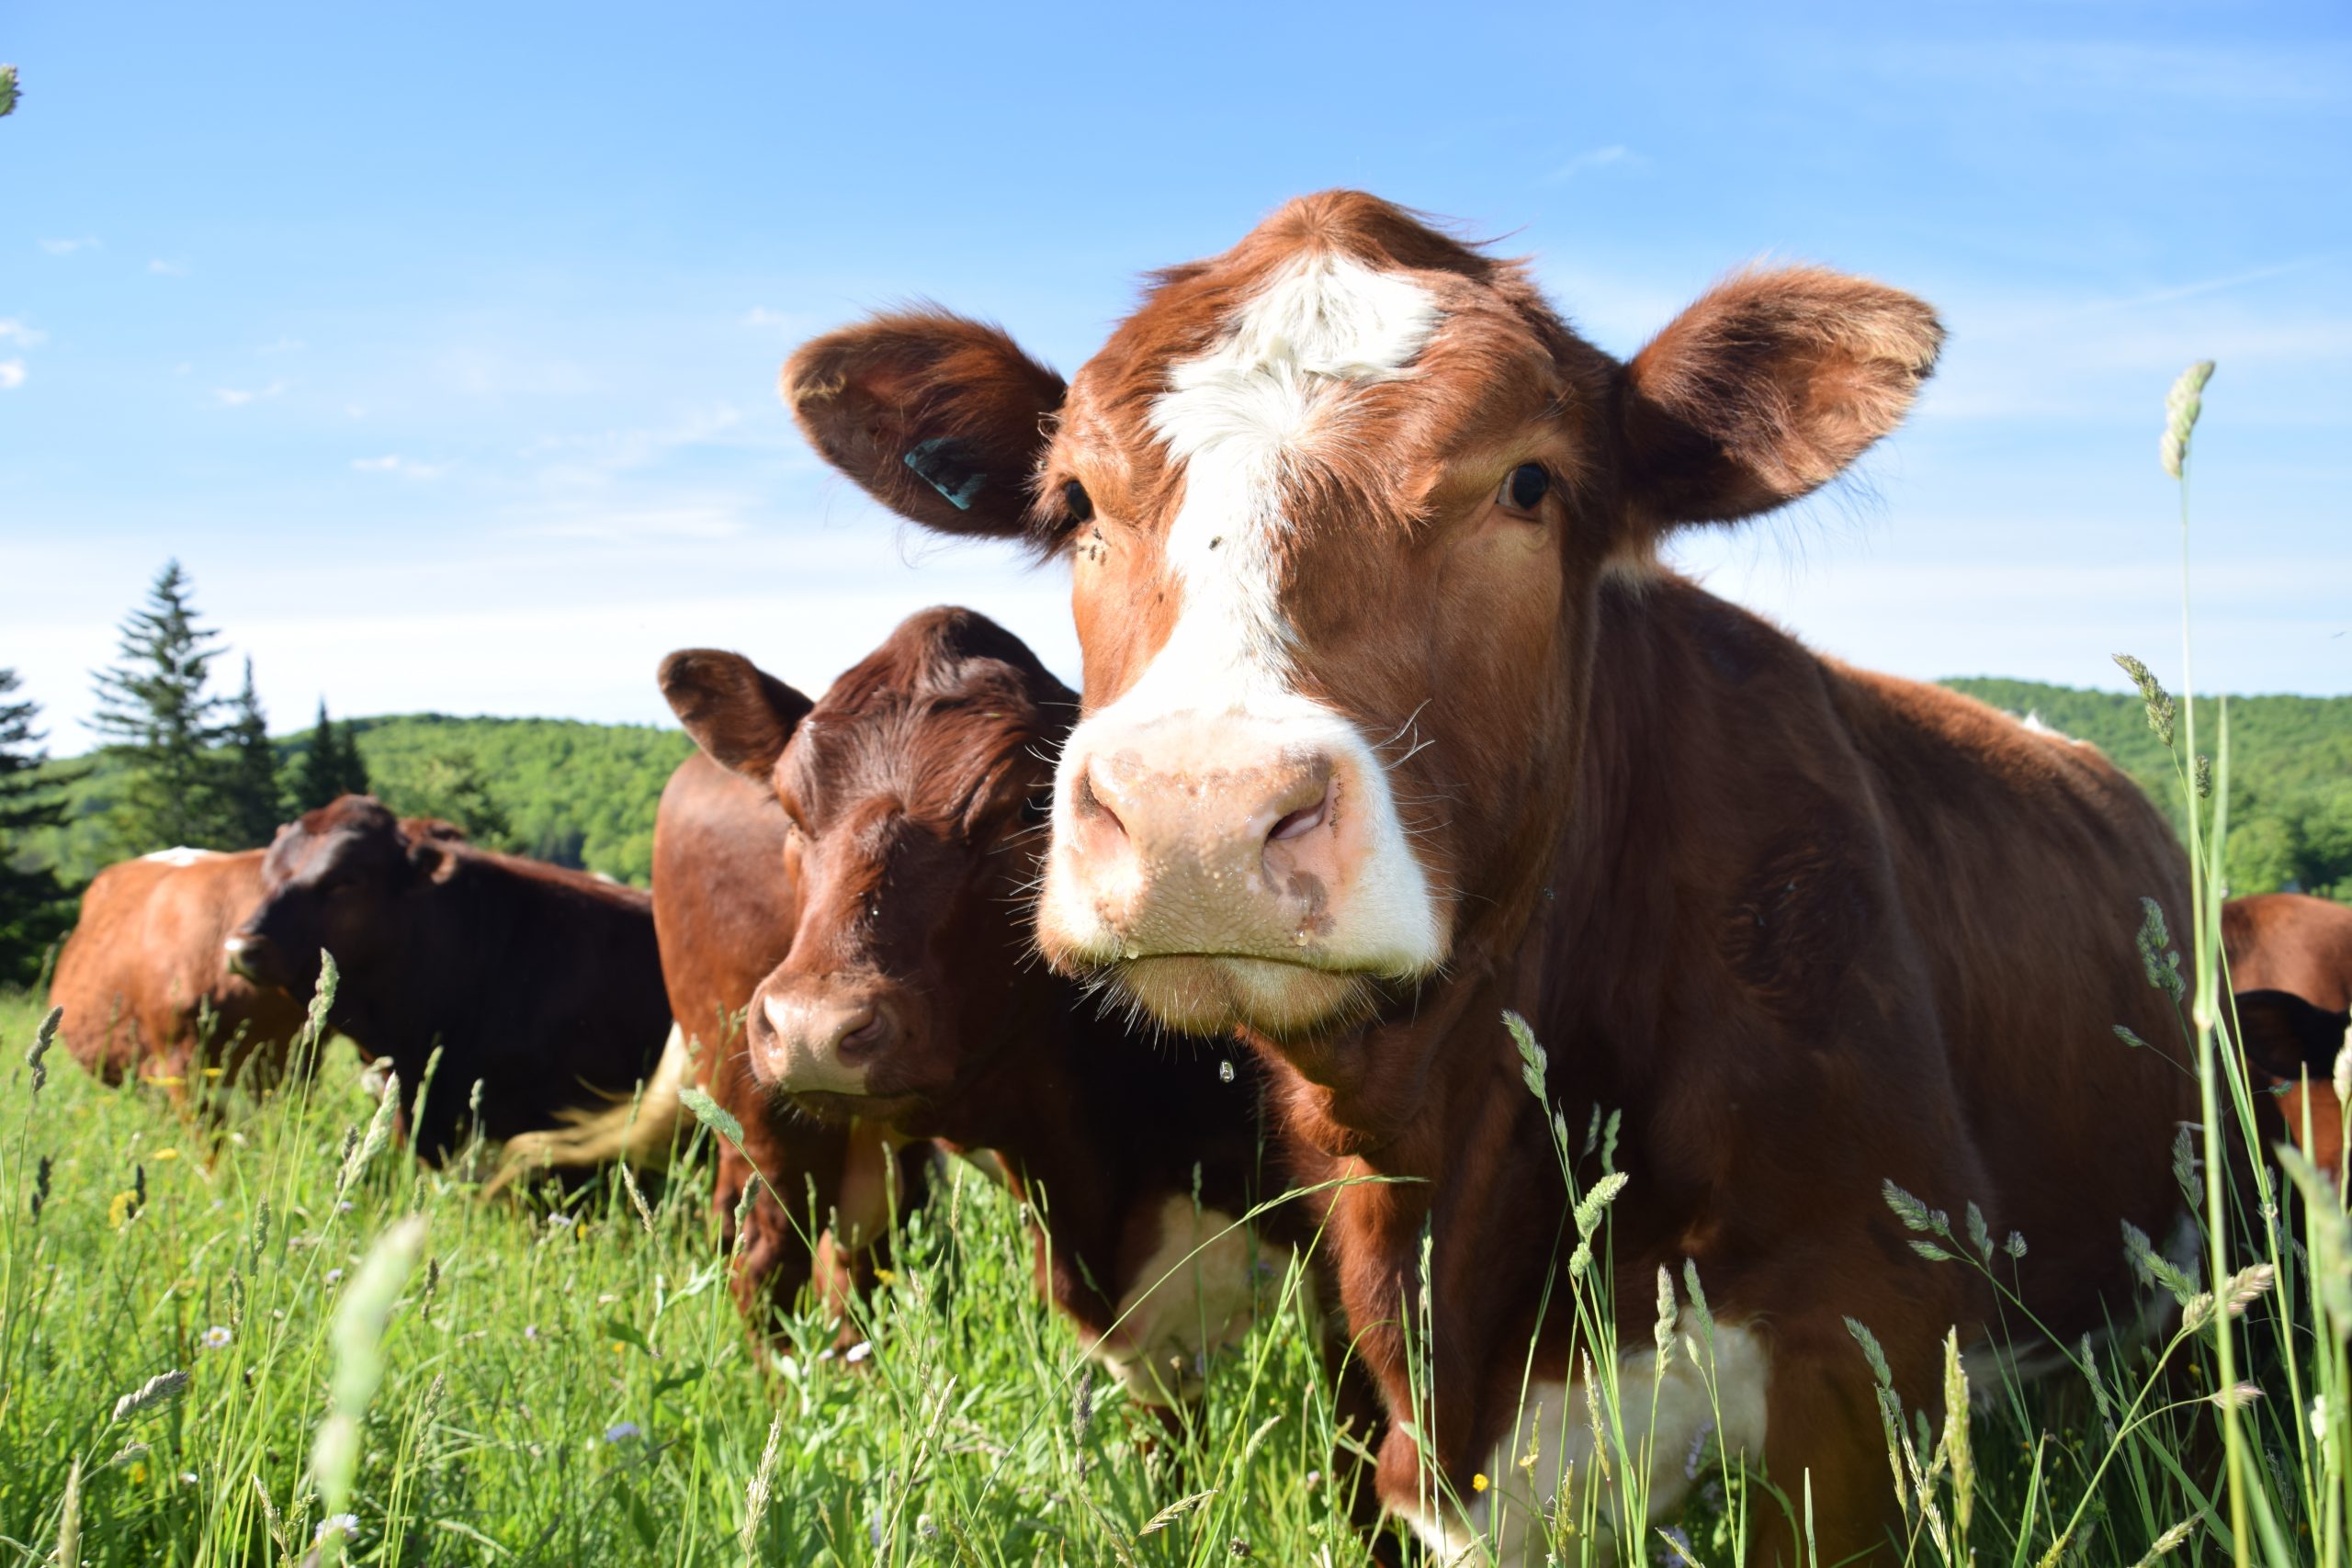 Close-up of cows in a field captioned “Get inspired to leverage our network for food system transformation”